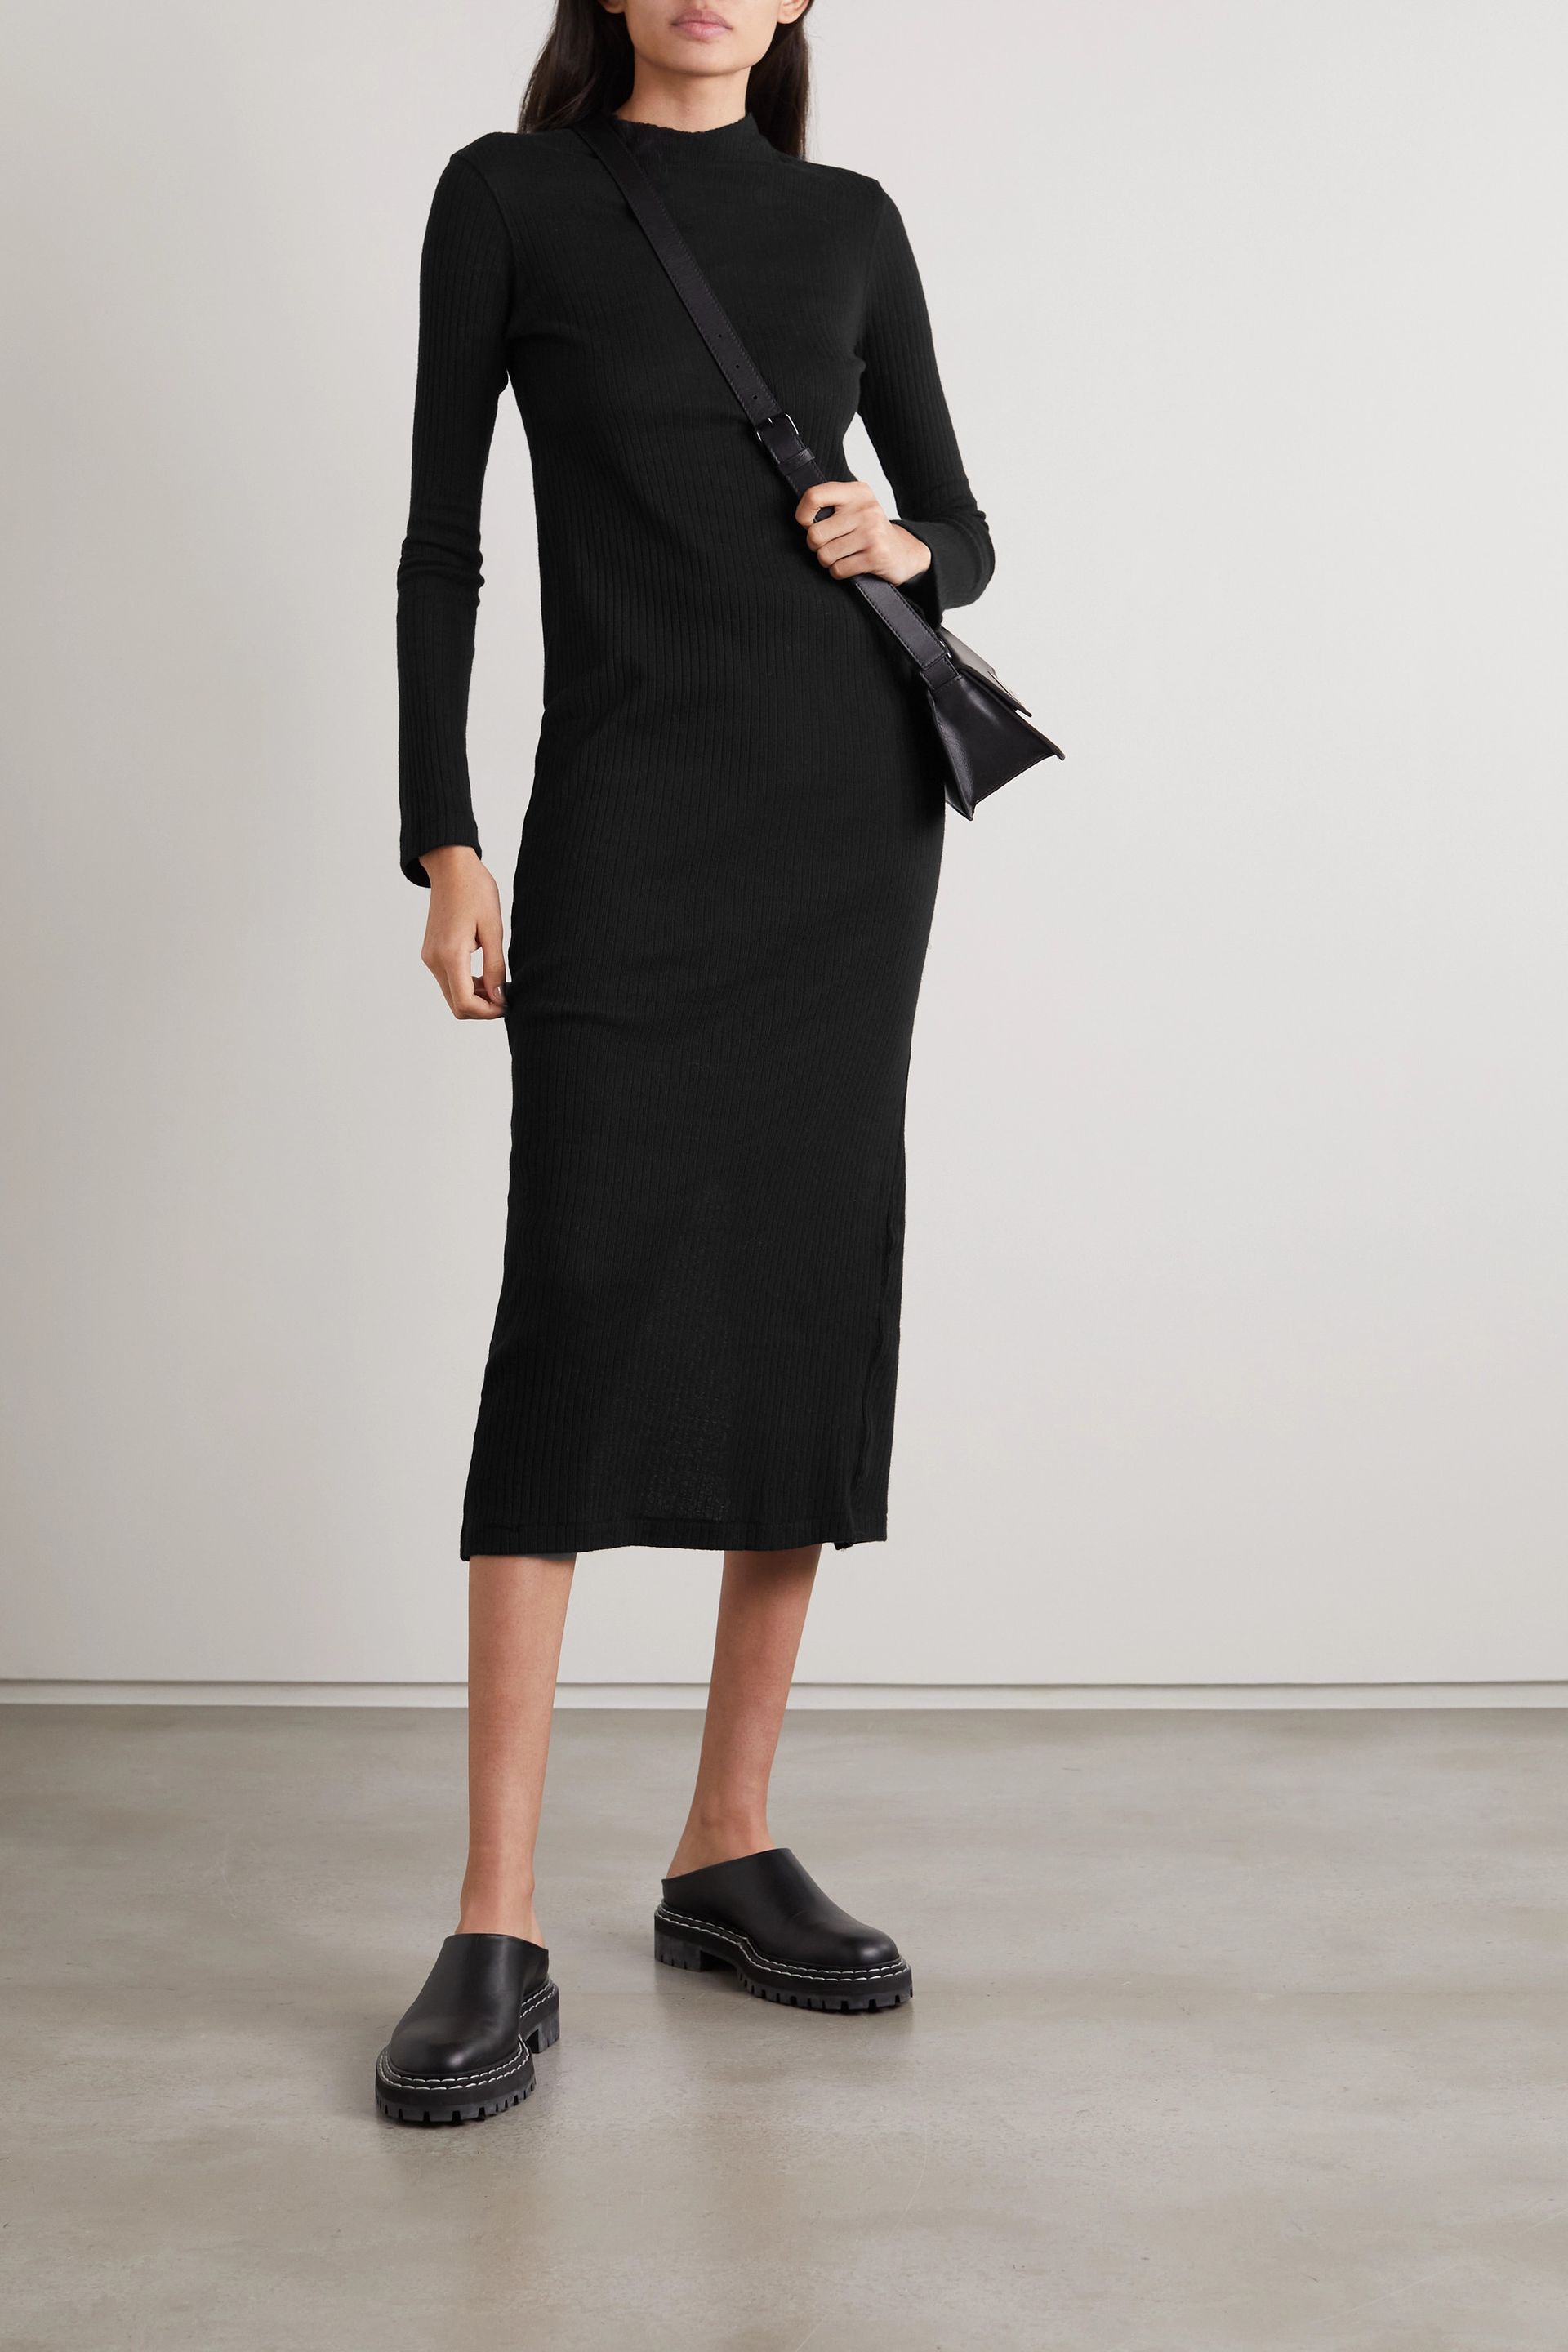 29 Finds From Net-a-Porter's 2022 Sale That Will Sell Out | Who What Wear